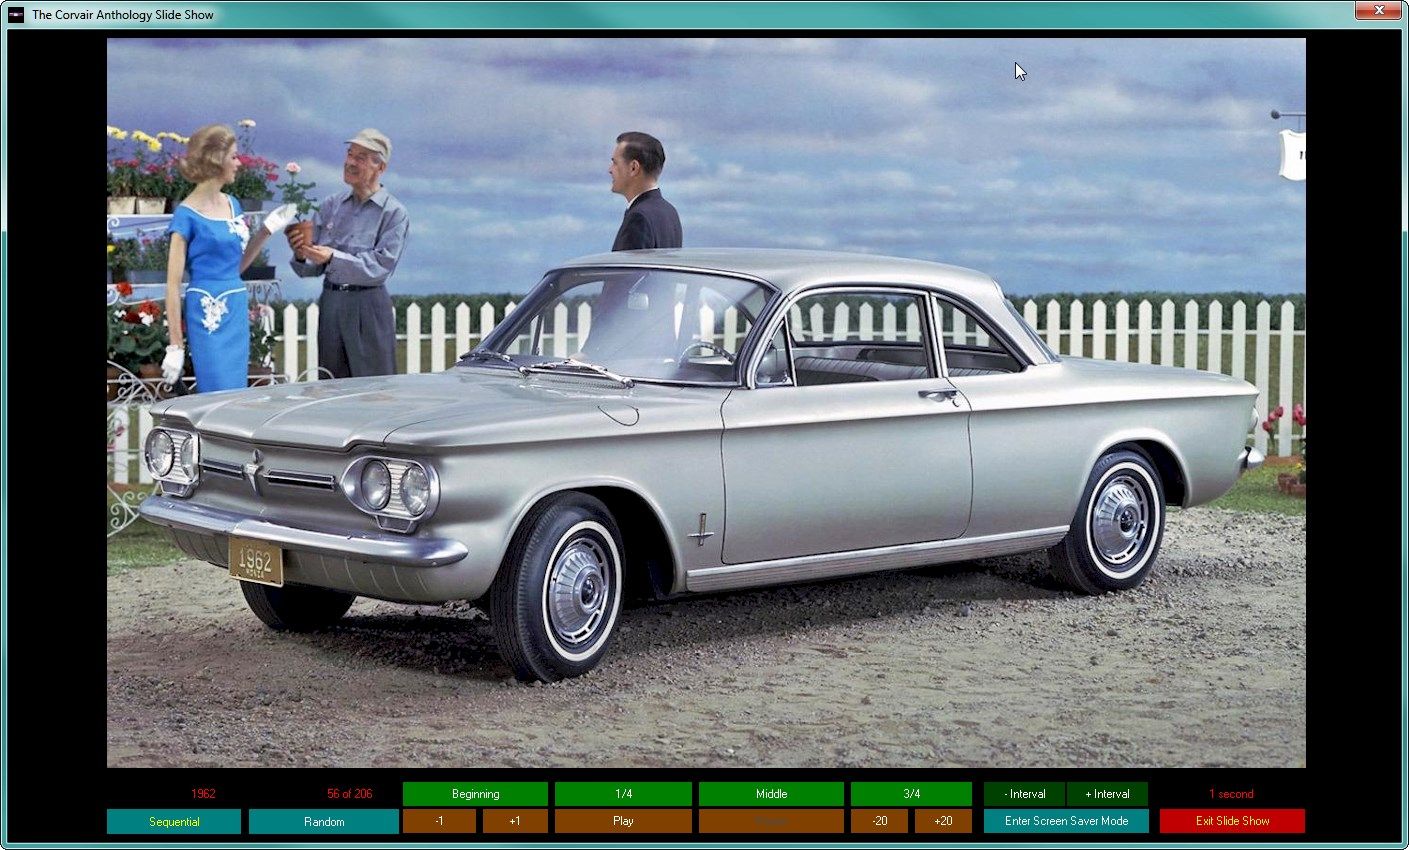 The Corvair Anthology 1960-1969